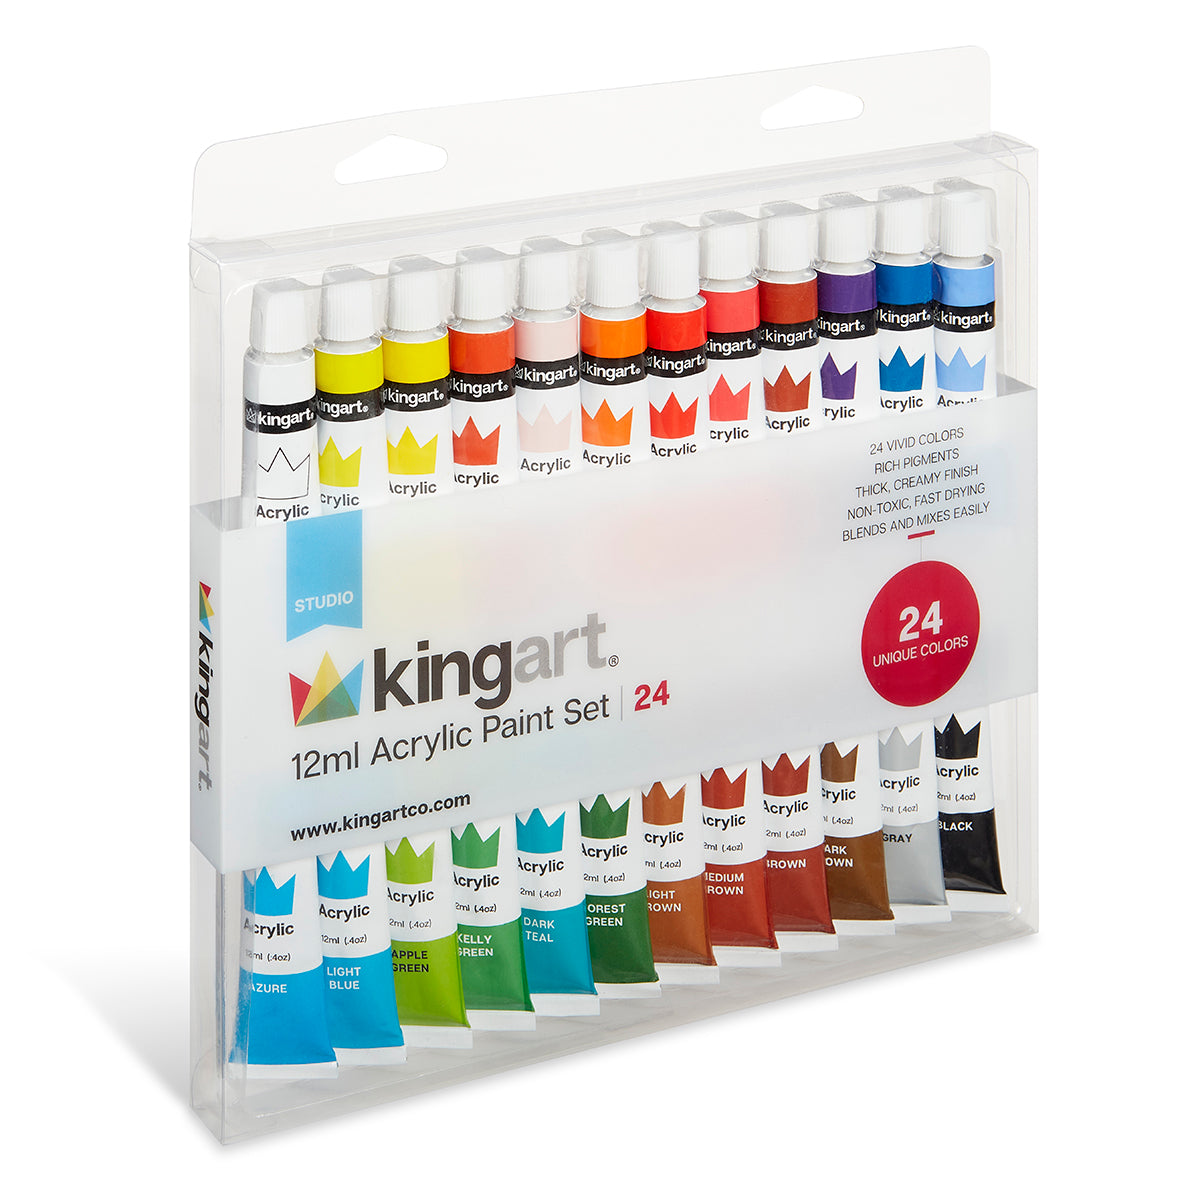 KINGART Drawing Paper Pad, Pack of 2, 8 x 10 inches, 75 Pages Each